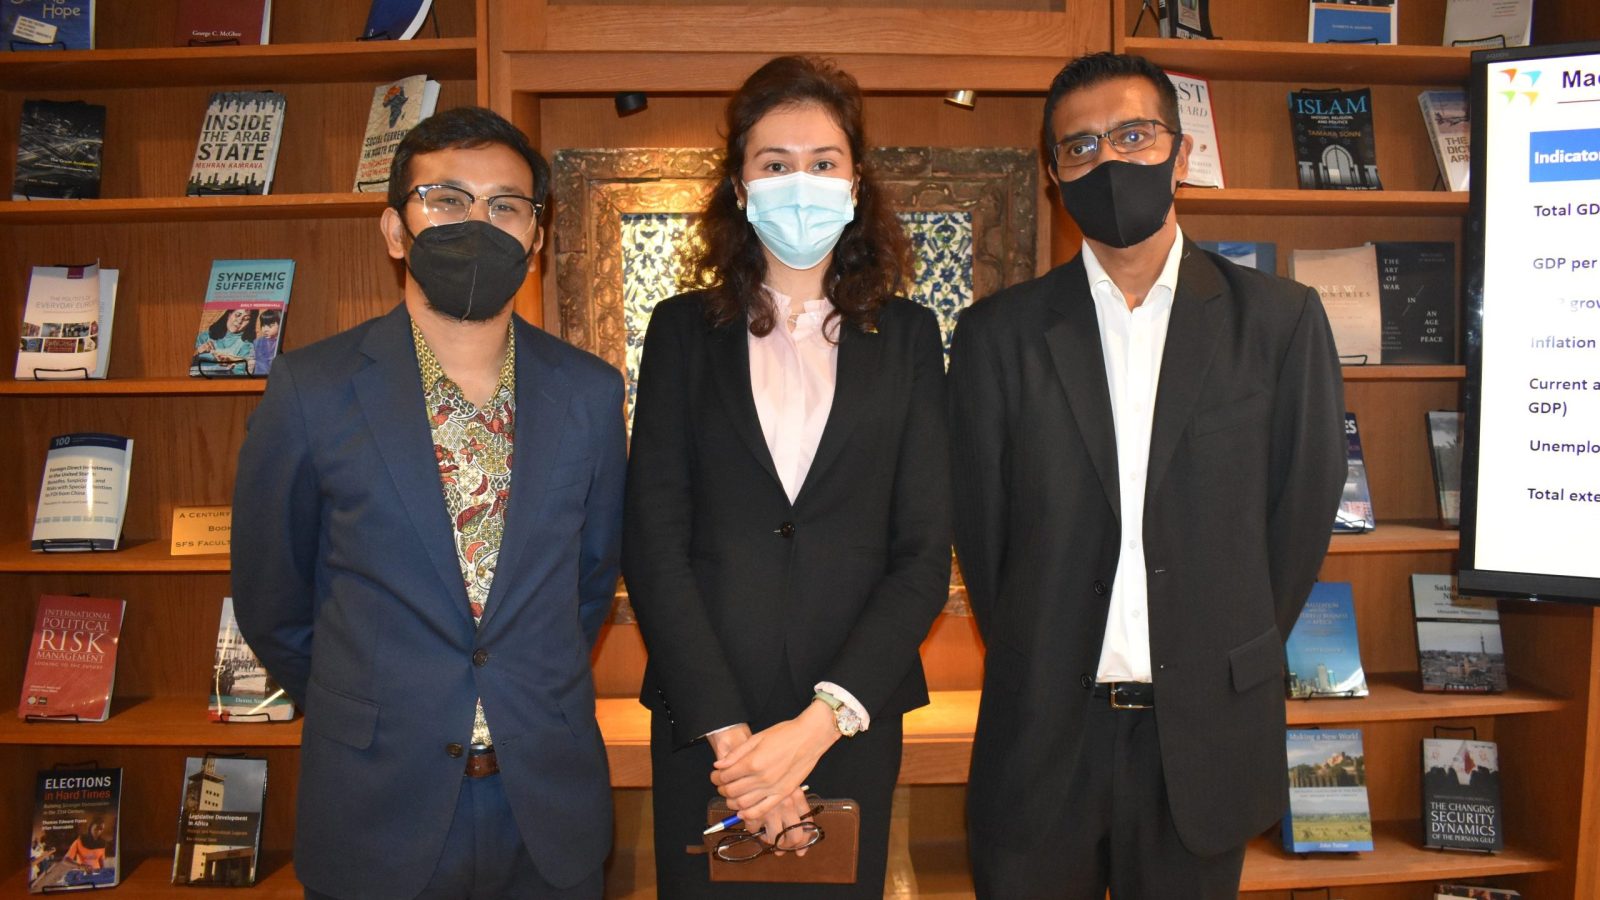 Putra and Kamilla standing with Partish Halady wearing business attire in front of bookshelf in a library.